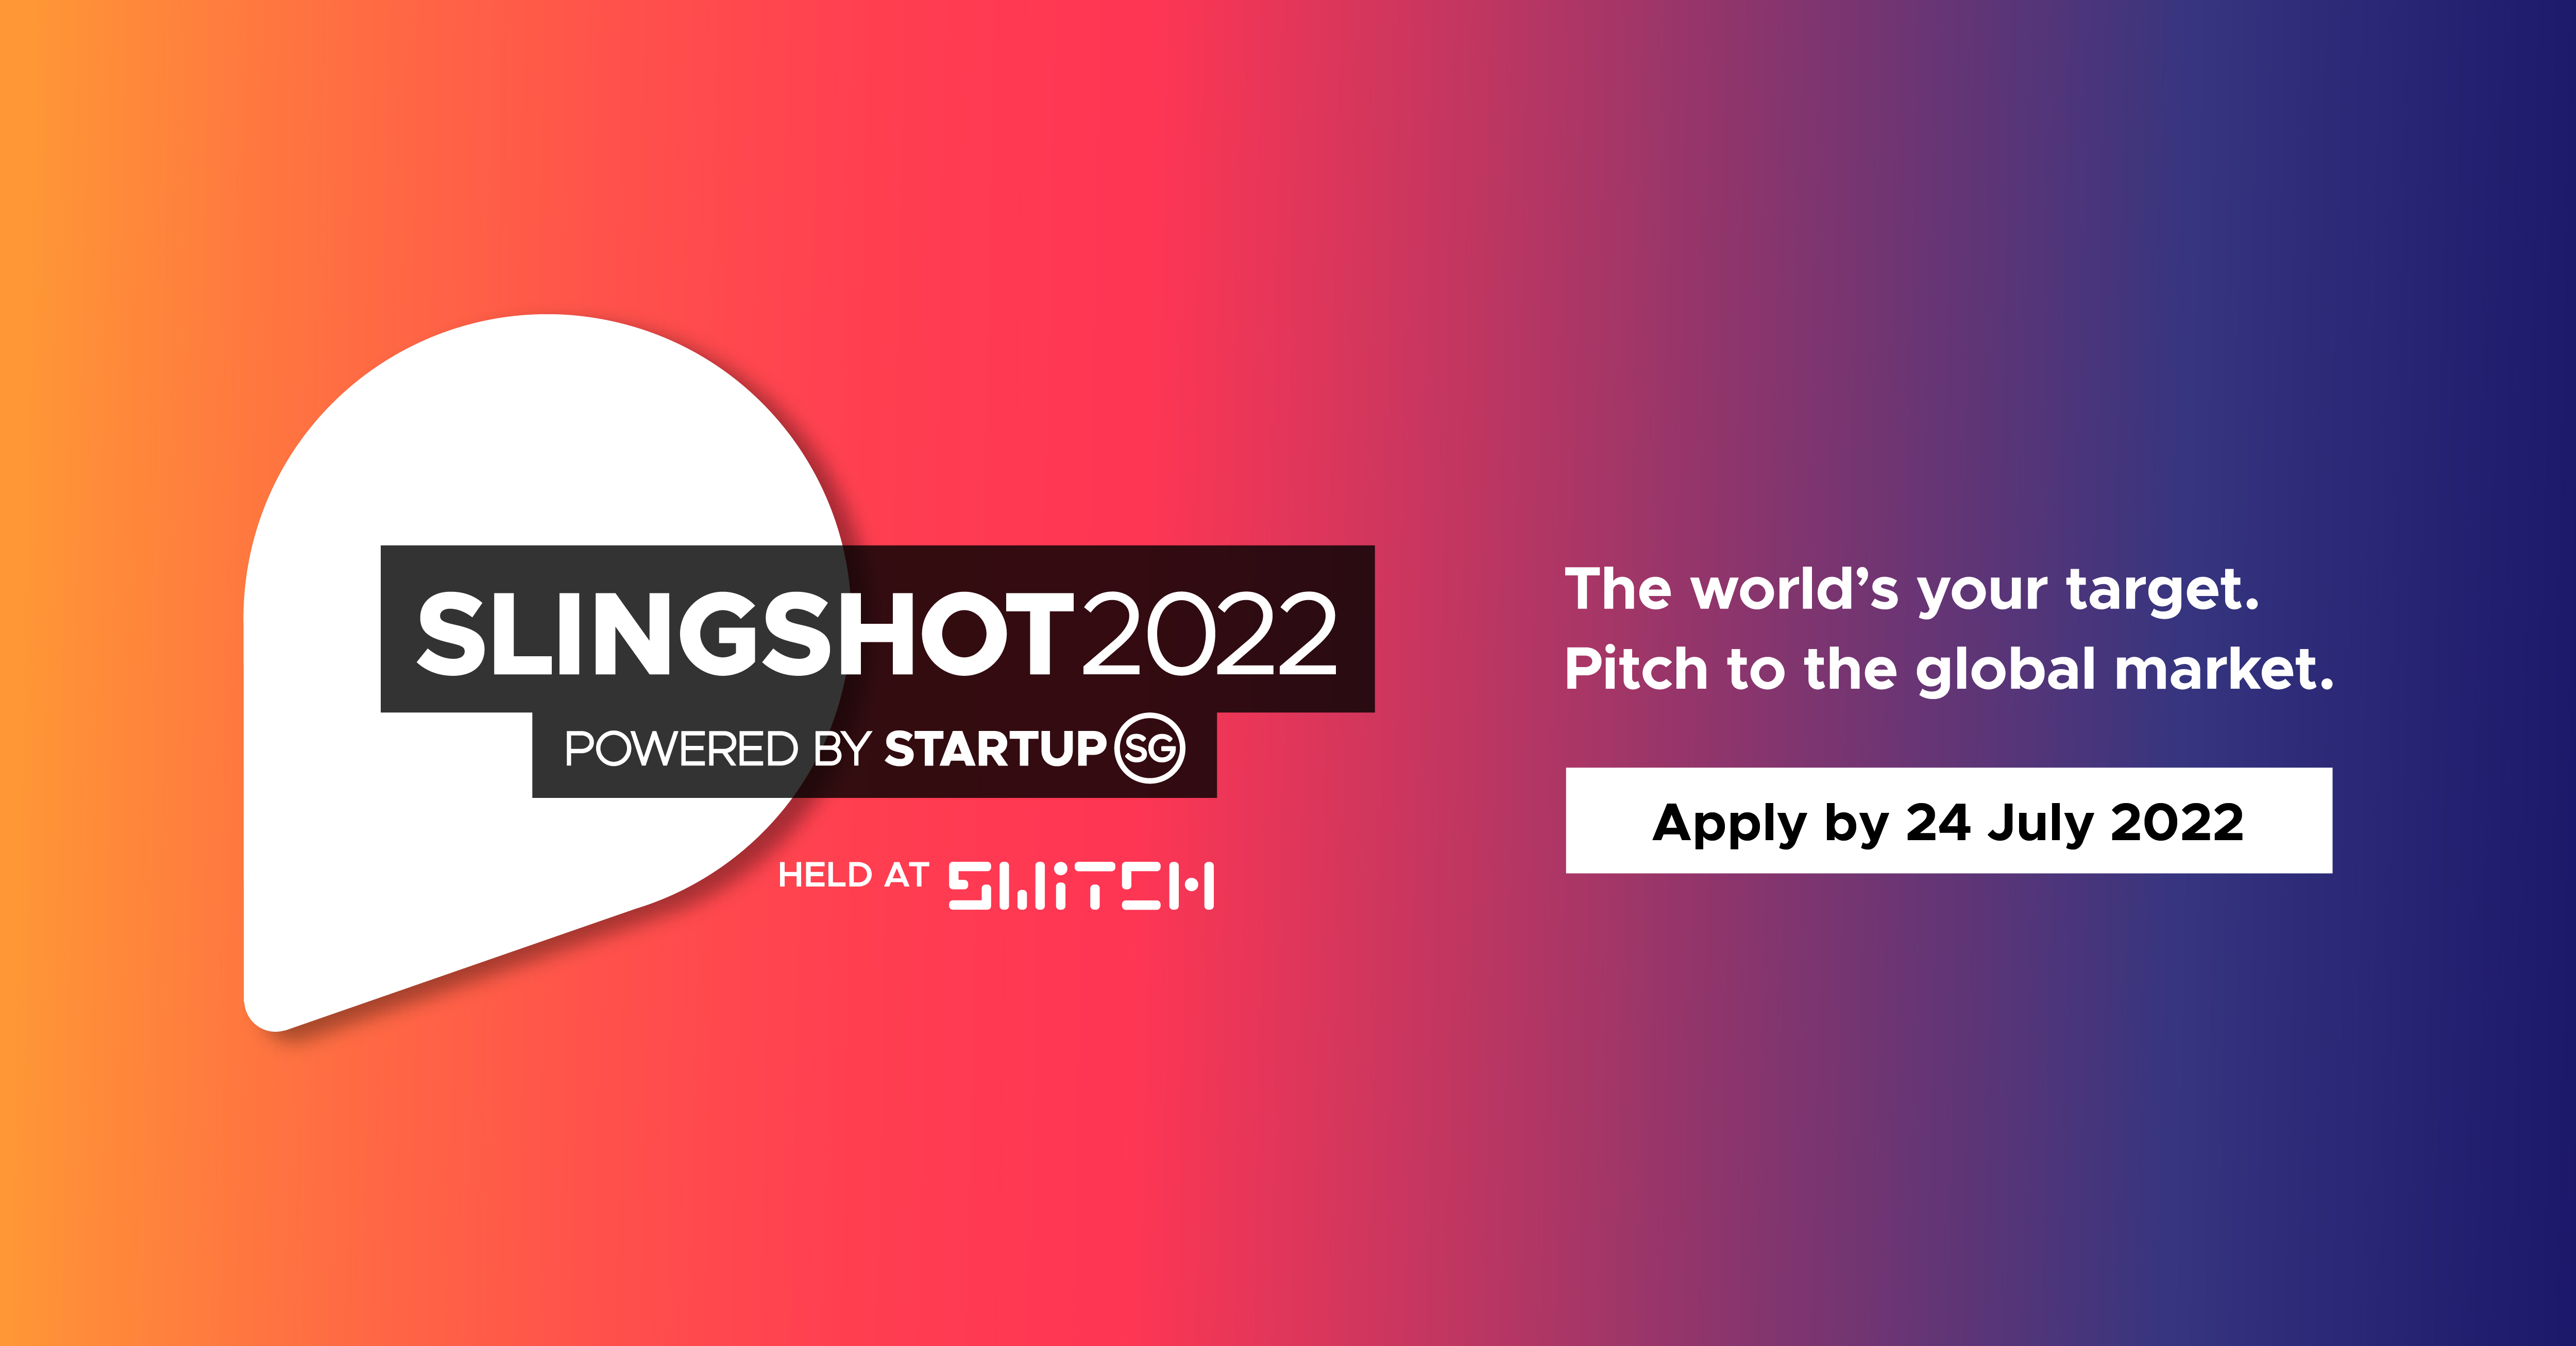 SLINGSHOT 2022 deep tech startup competitions applications are open